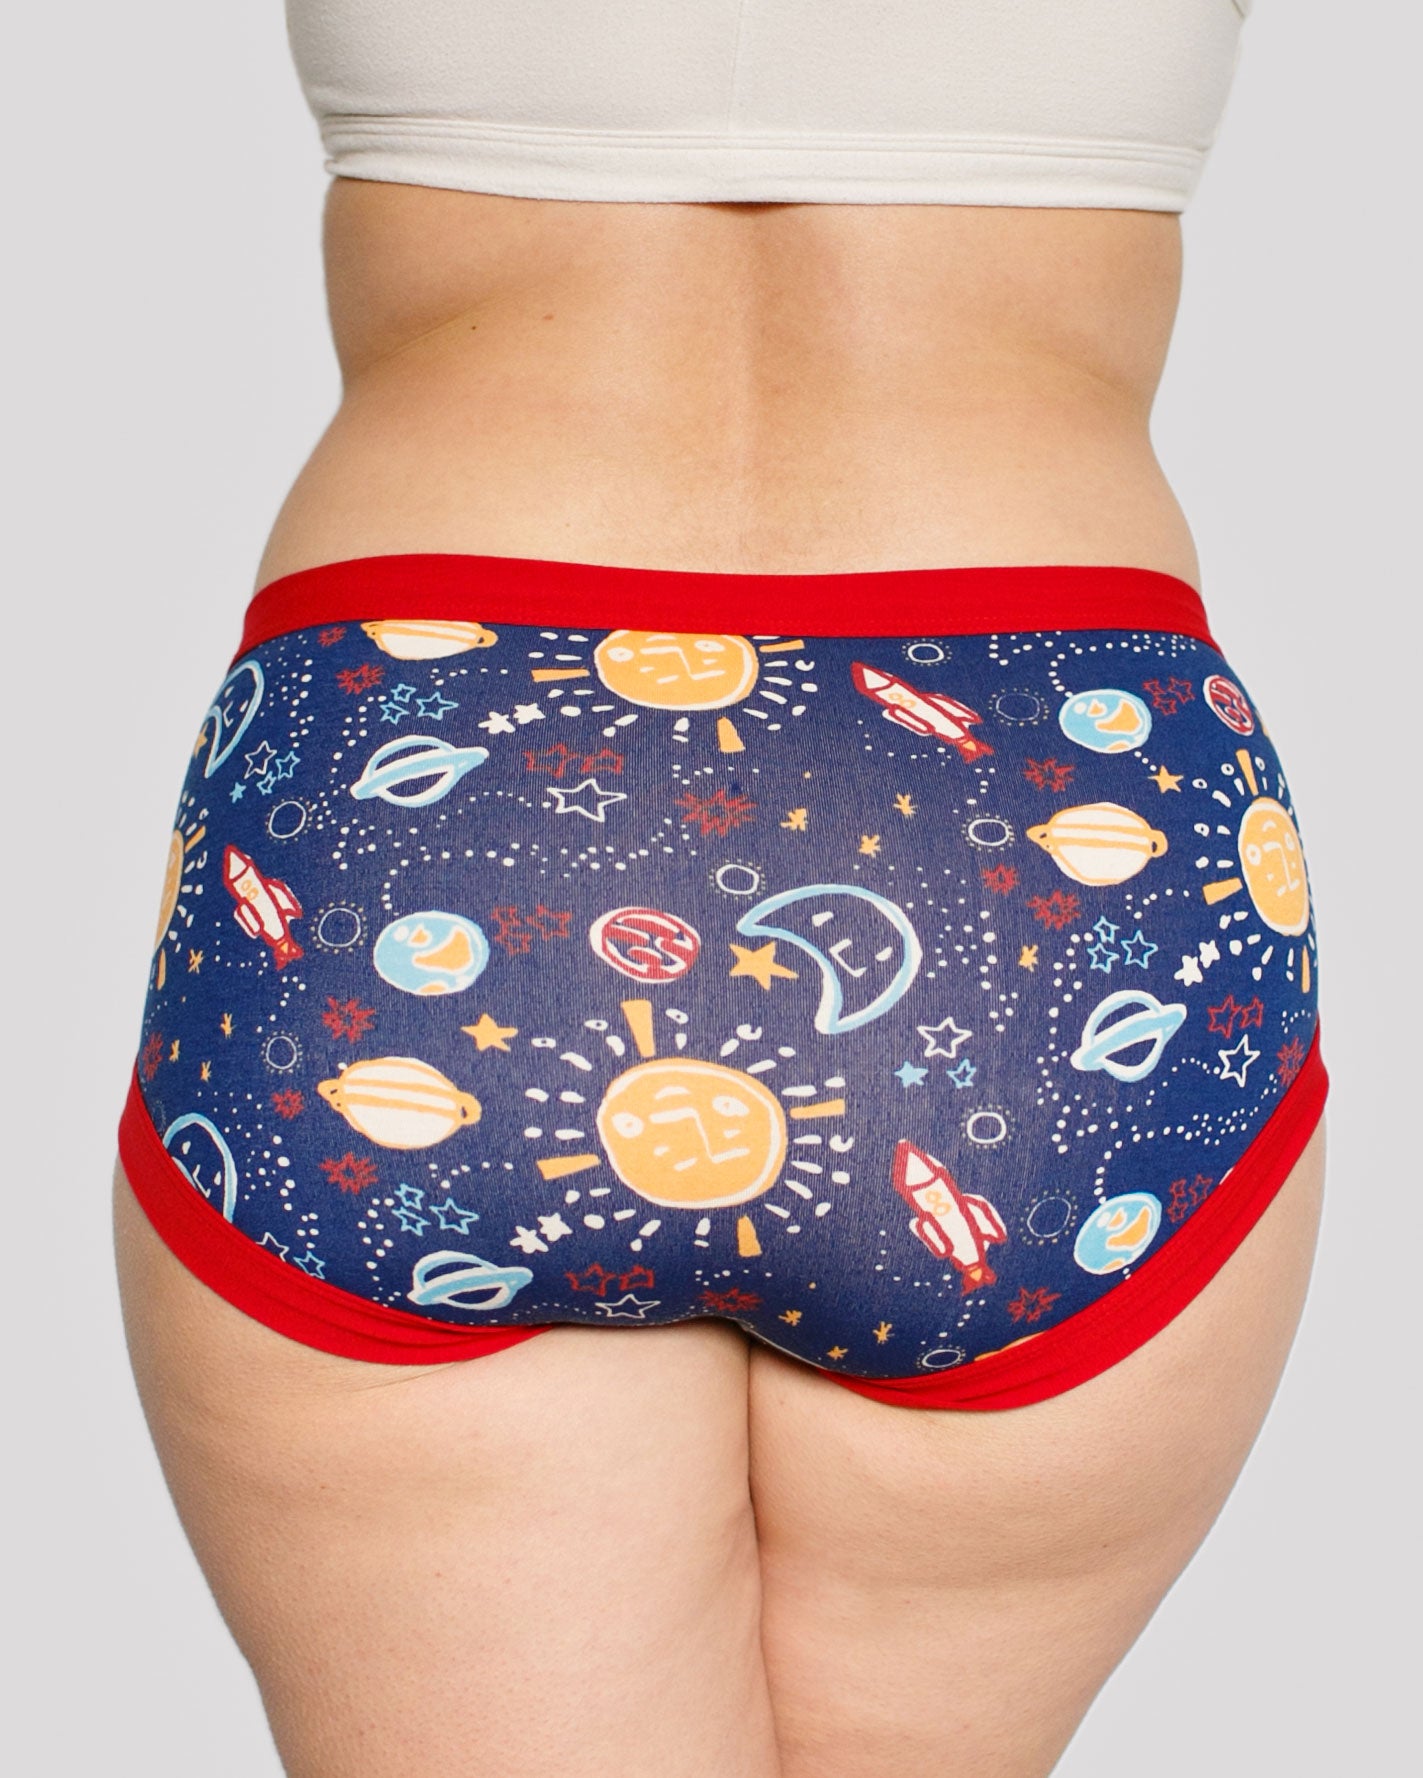 Model's bum wearing Thunderpants organic cotton Hipster style underwear in a sun, planets, stars, and universe print.